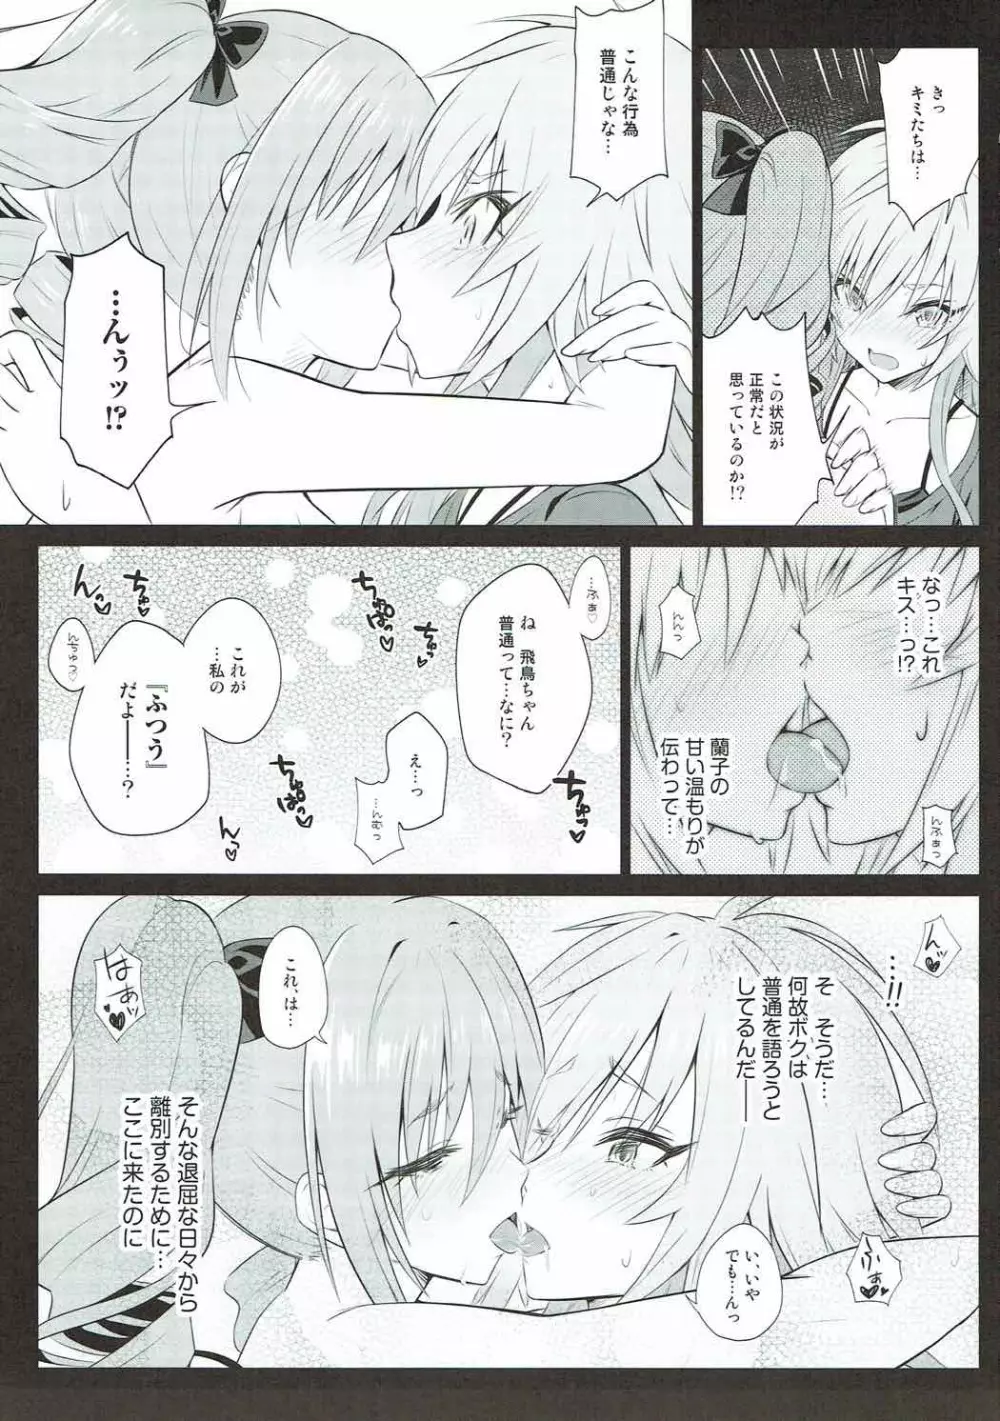 The Resonant Notes -共鳴世界の旋律符牒- Page.10